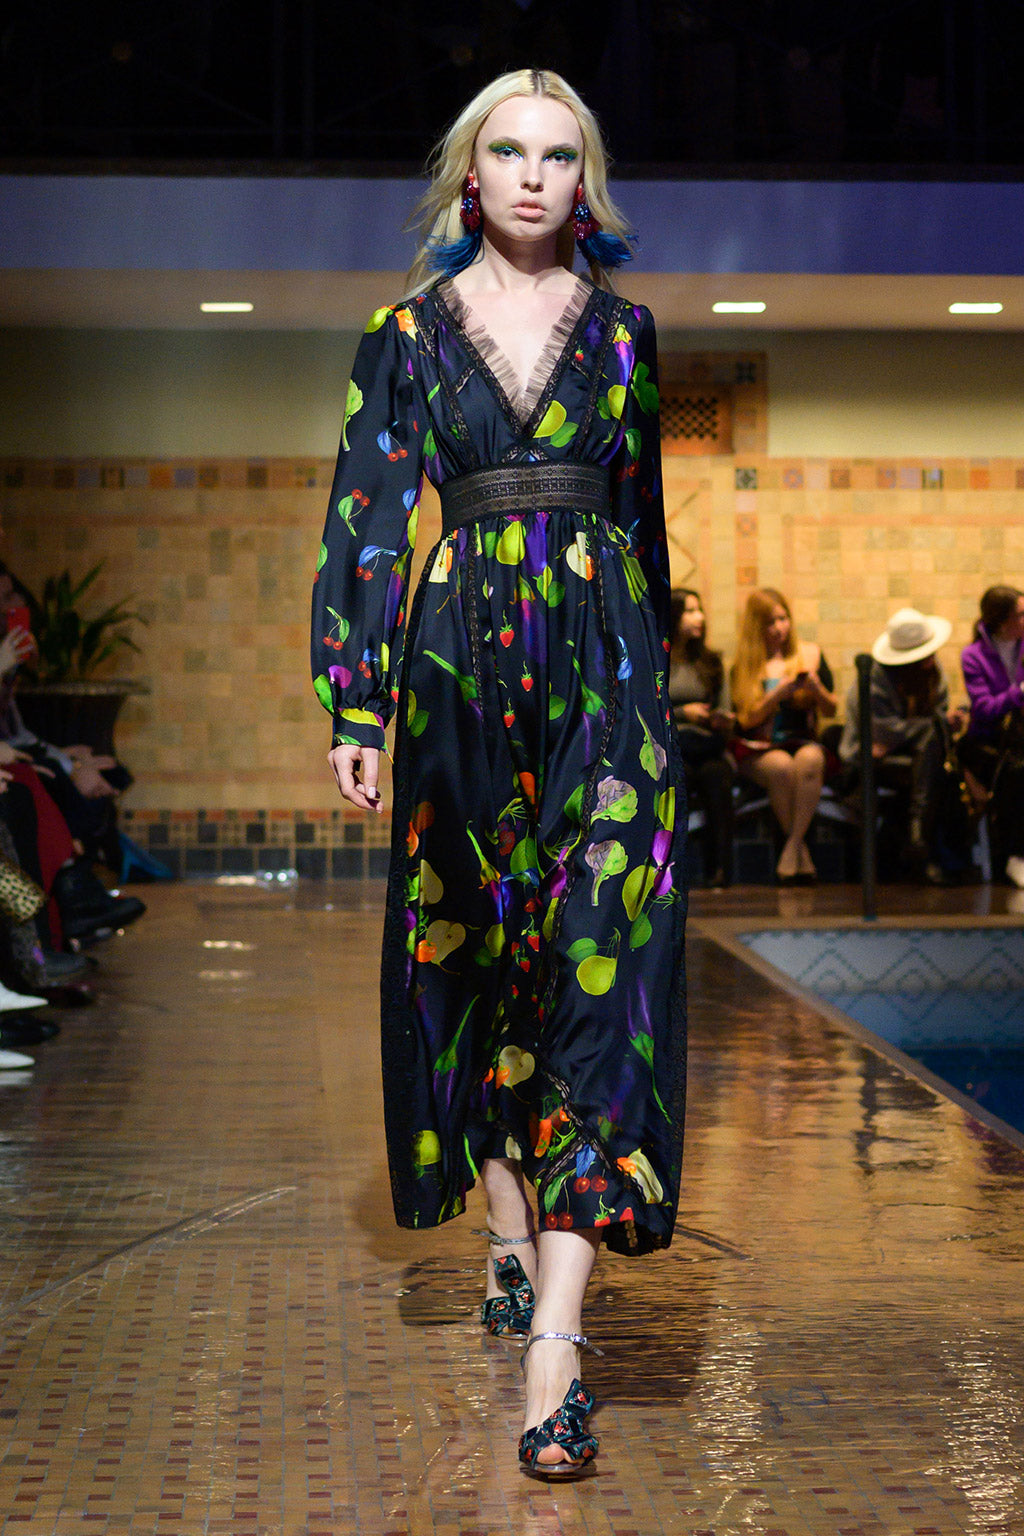 Cynthia Rowley Fall 2019 look 1 featuring a mini dress with elbow length sleeves and tulle in a fruit print